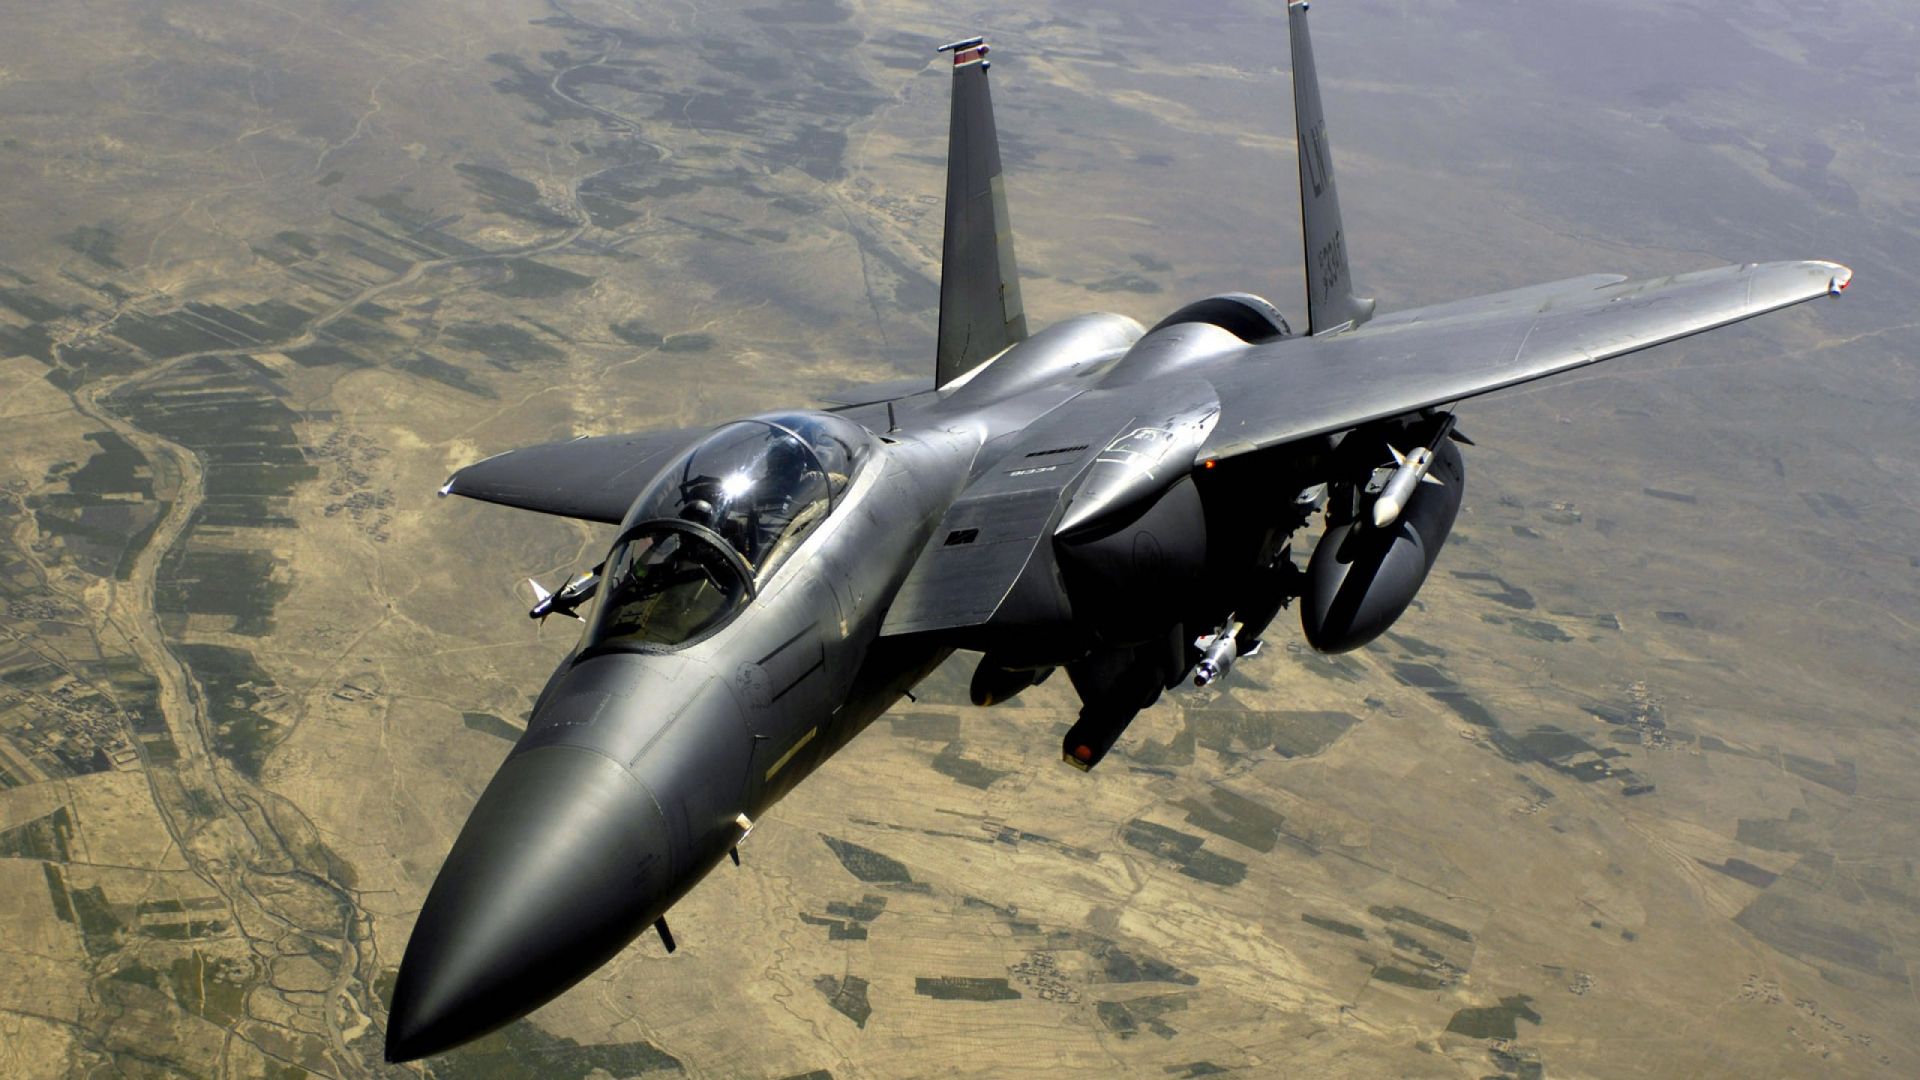 F-15, tactical fighter, Eagle, McDonnell Douglas, US Army, U.S. Air Force, aircraft (horizontal)